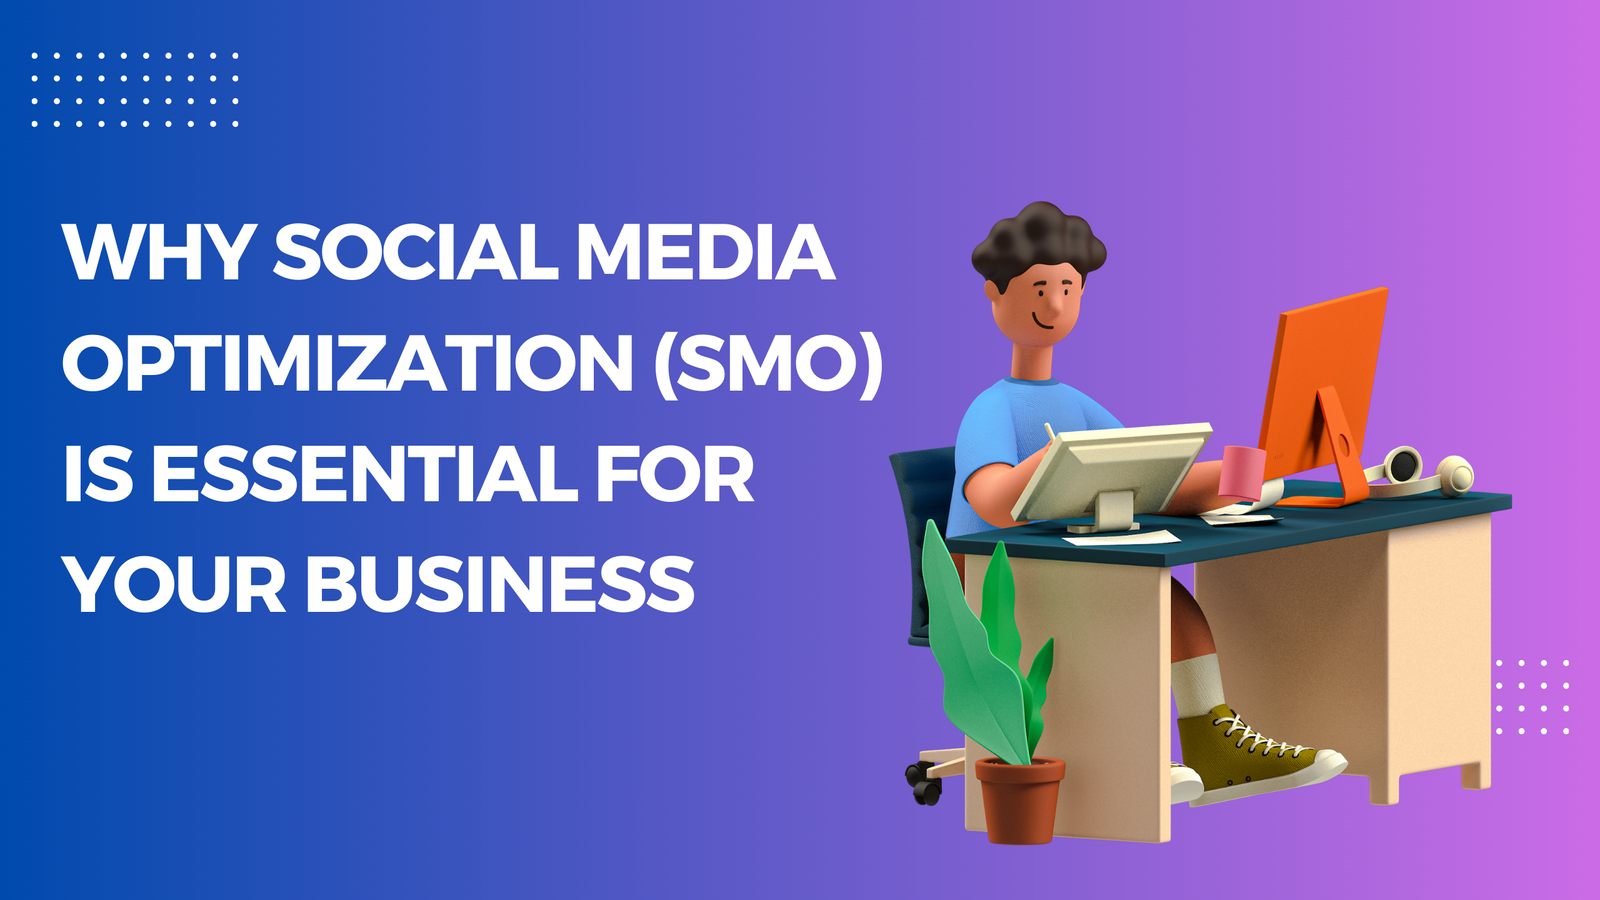 Why Social Media Optimization (SMO) Is Essential For Your Business